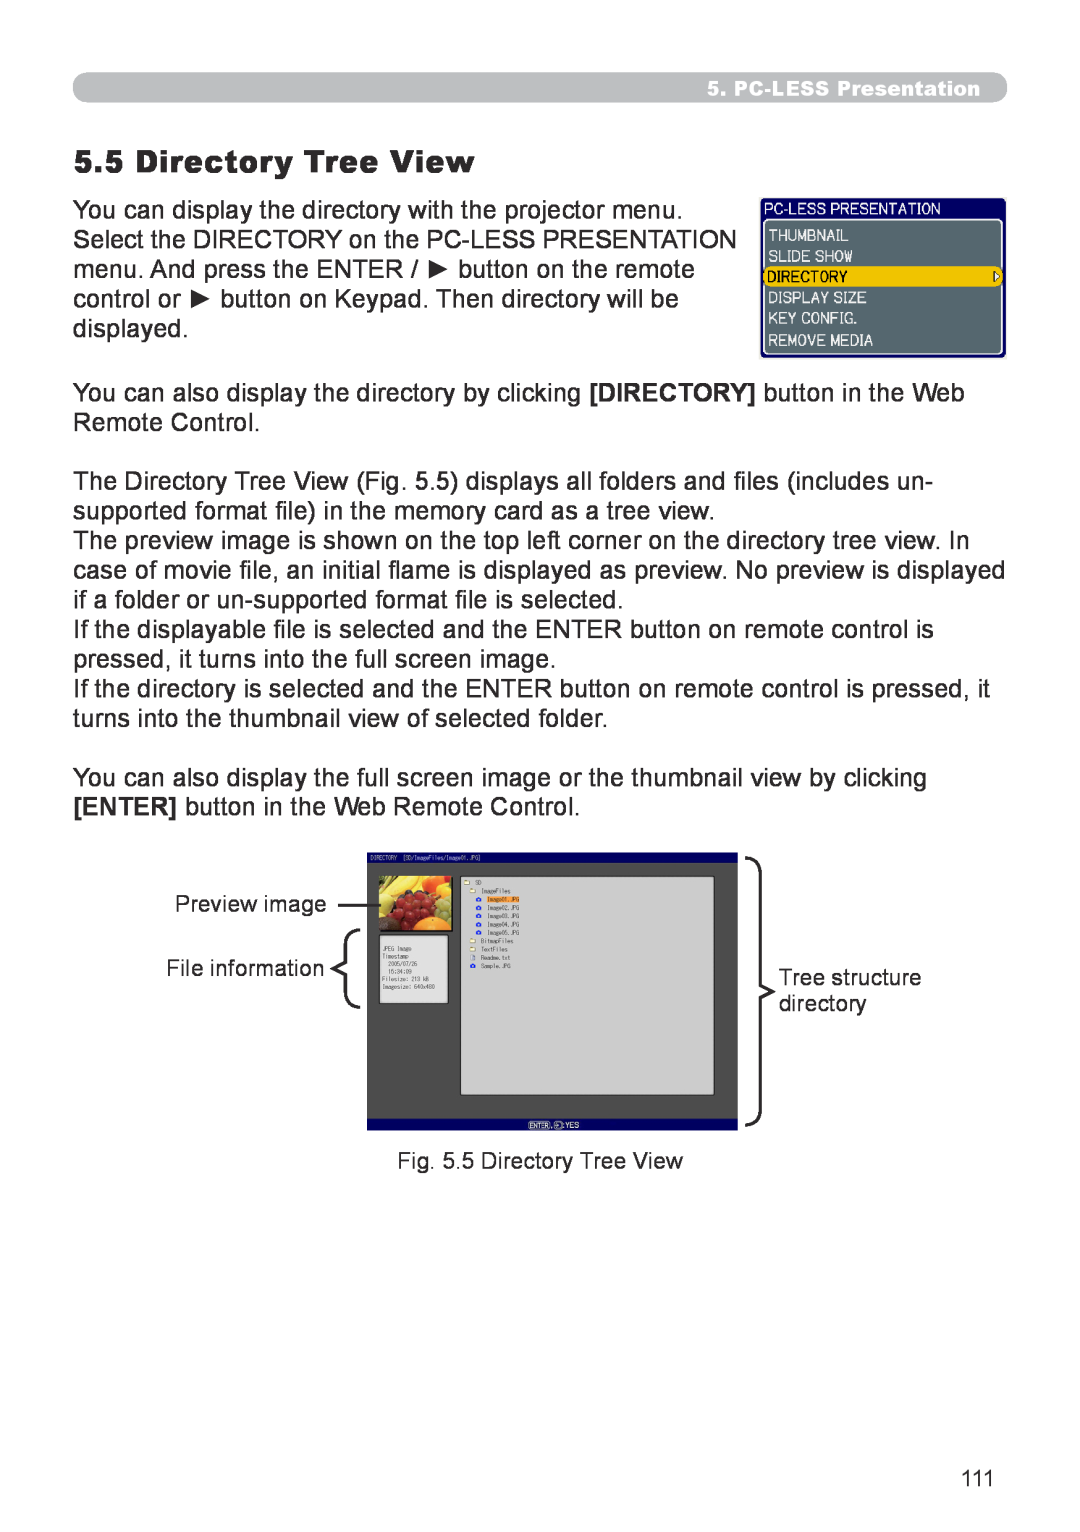 Hitachi CP-X267 user manual Preview image, File information, directory, 5 Directory Tree View 